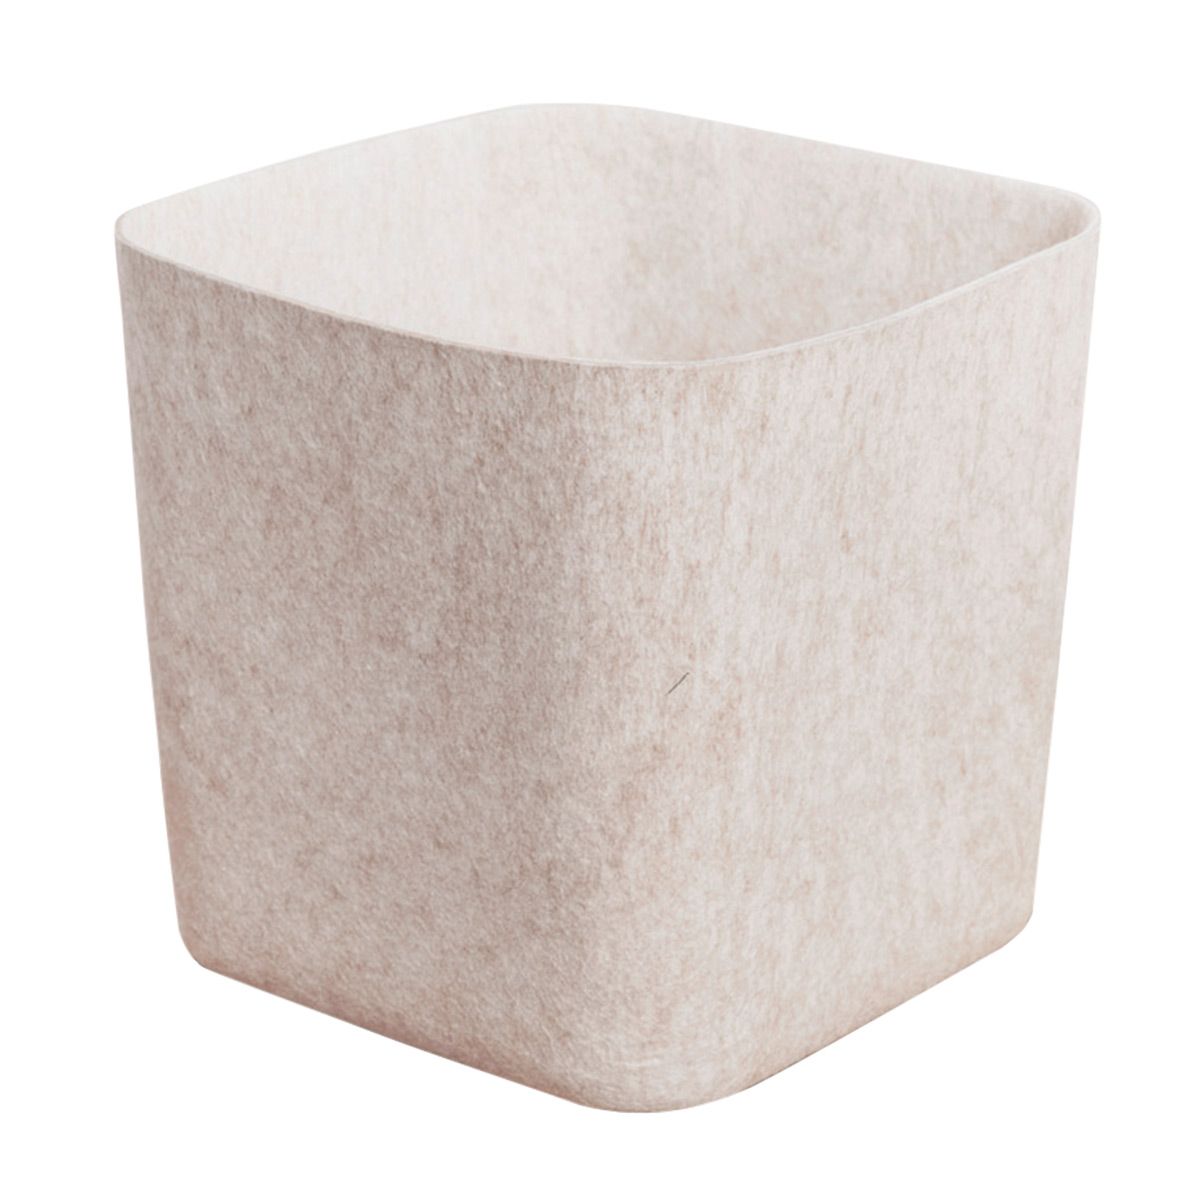 SortJoy Sculpted Felt Cube & Lid | The Container Store